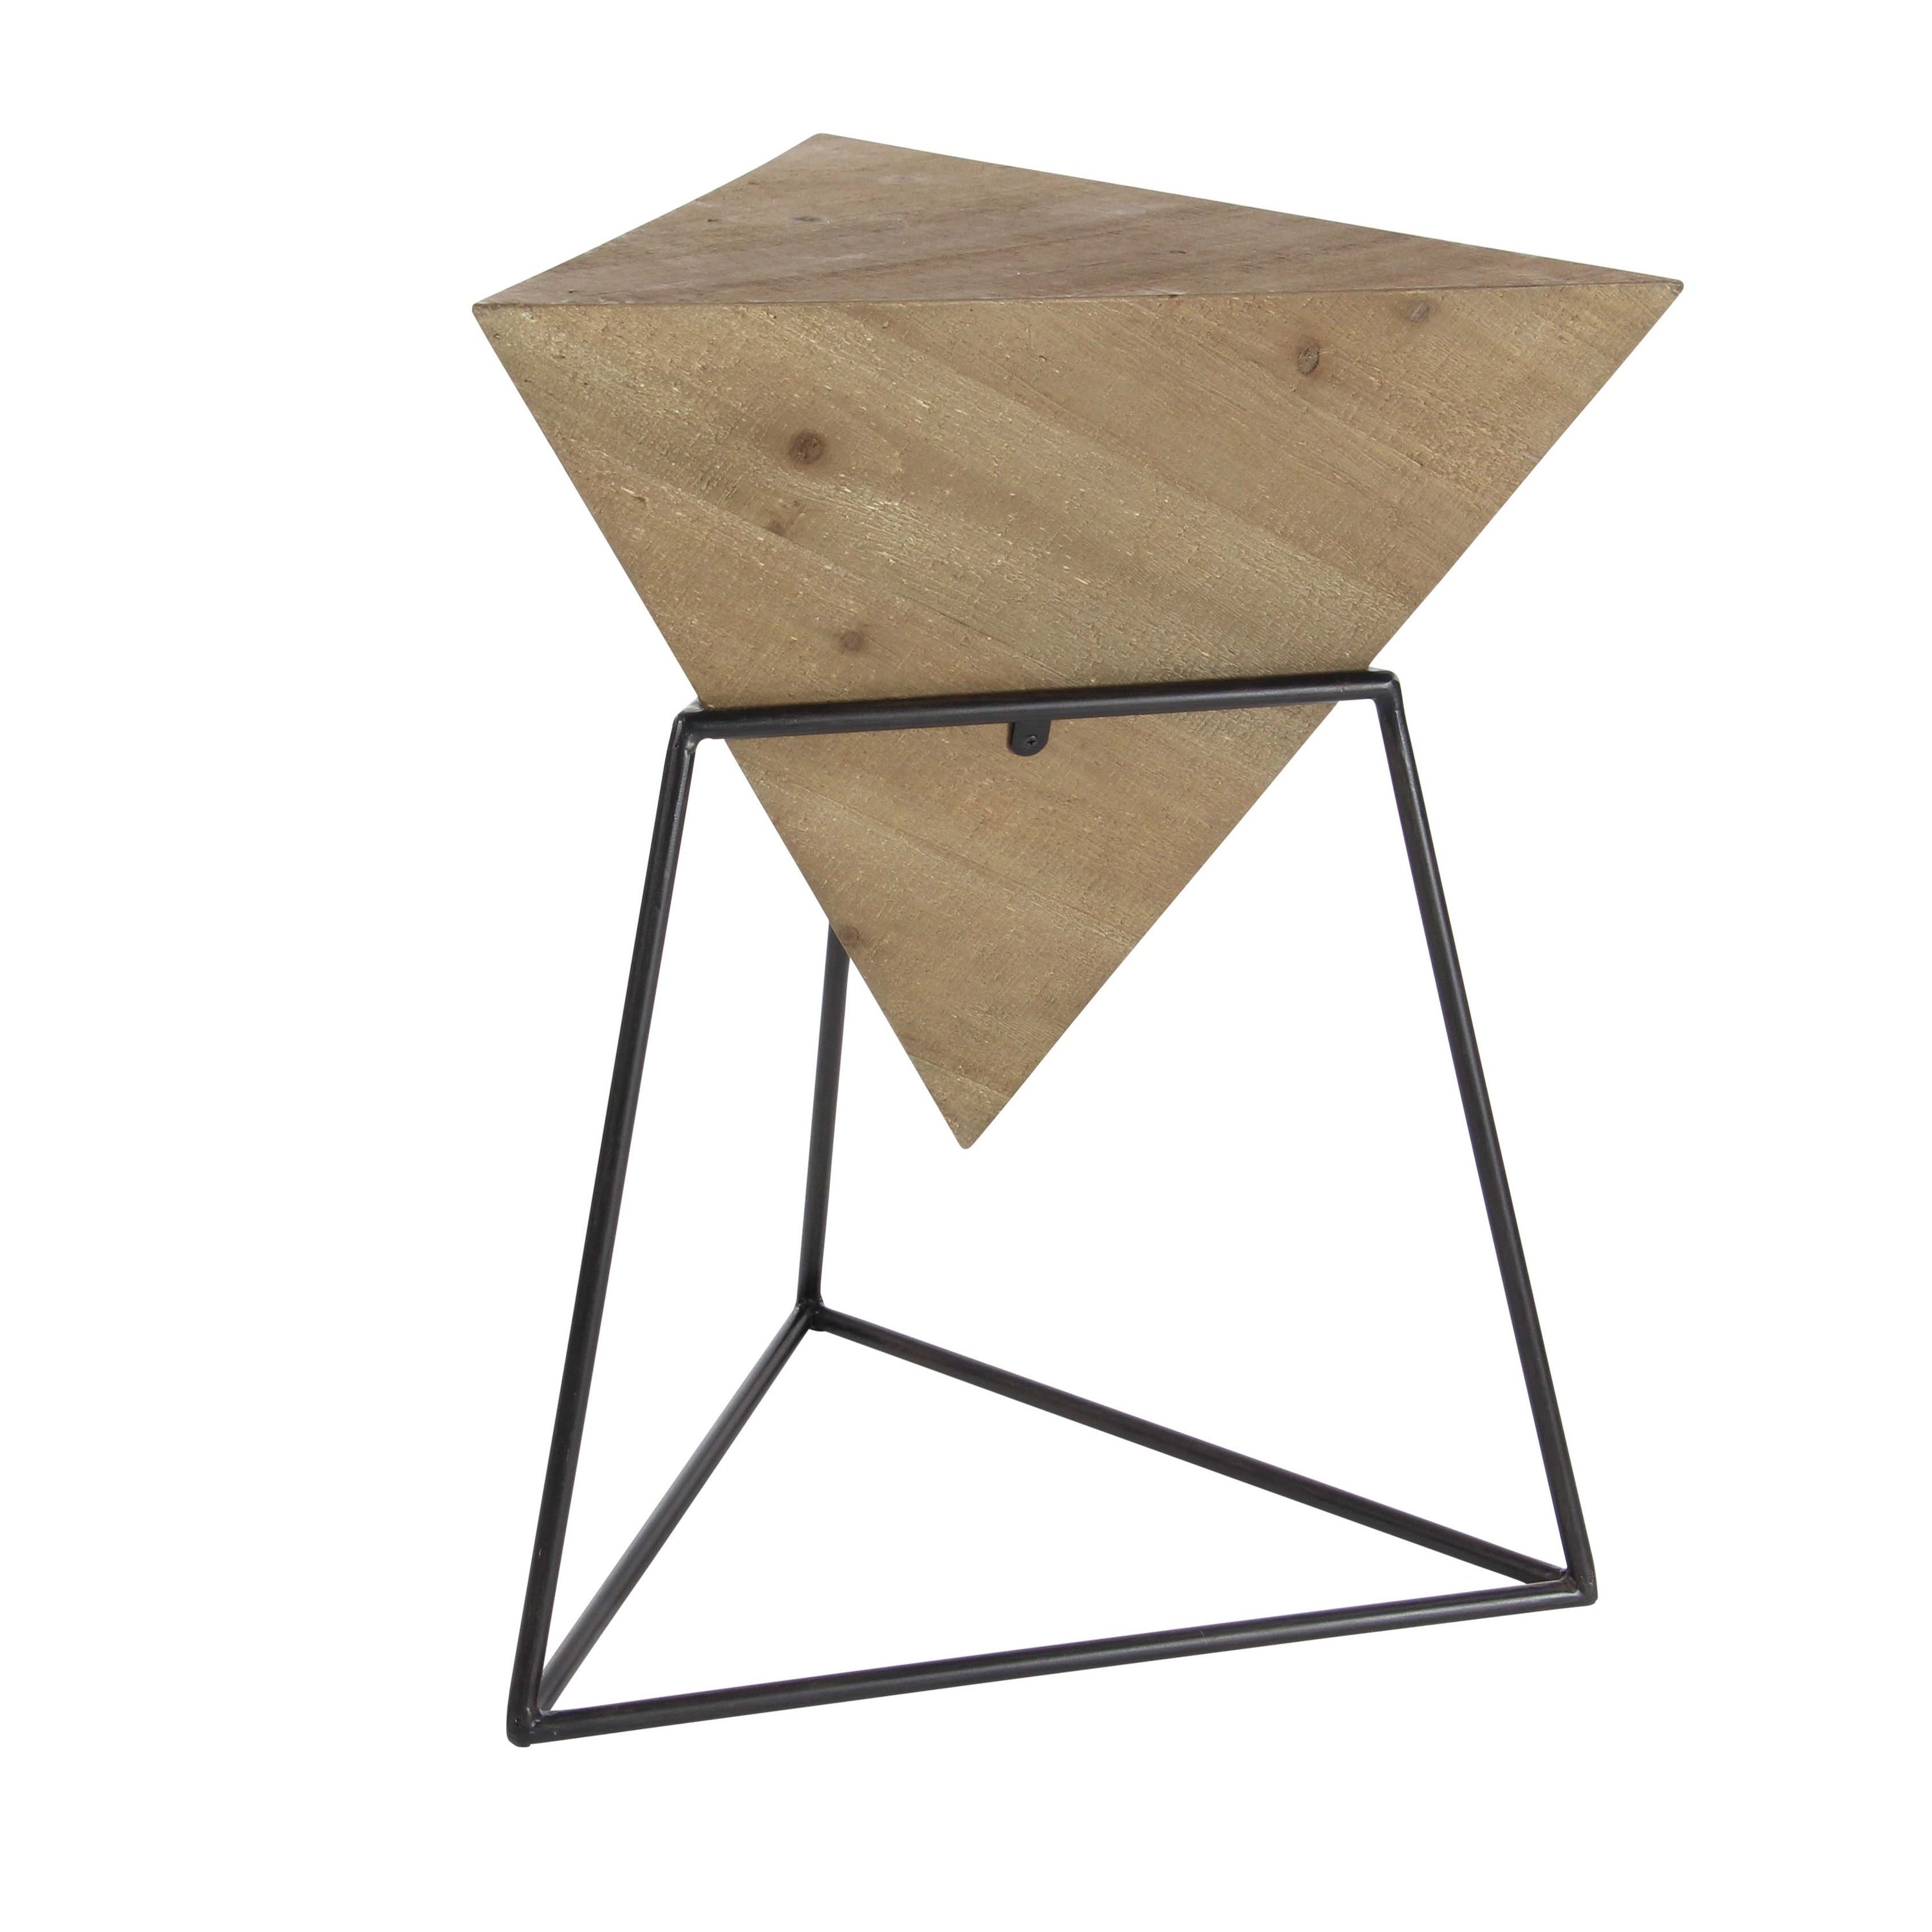 modern inch pyramid brown block wooden accent table studio wood free shipping today navy blue plastic tablecloth small room furniture clear glass nest tables pottery barn dining